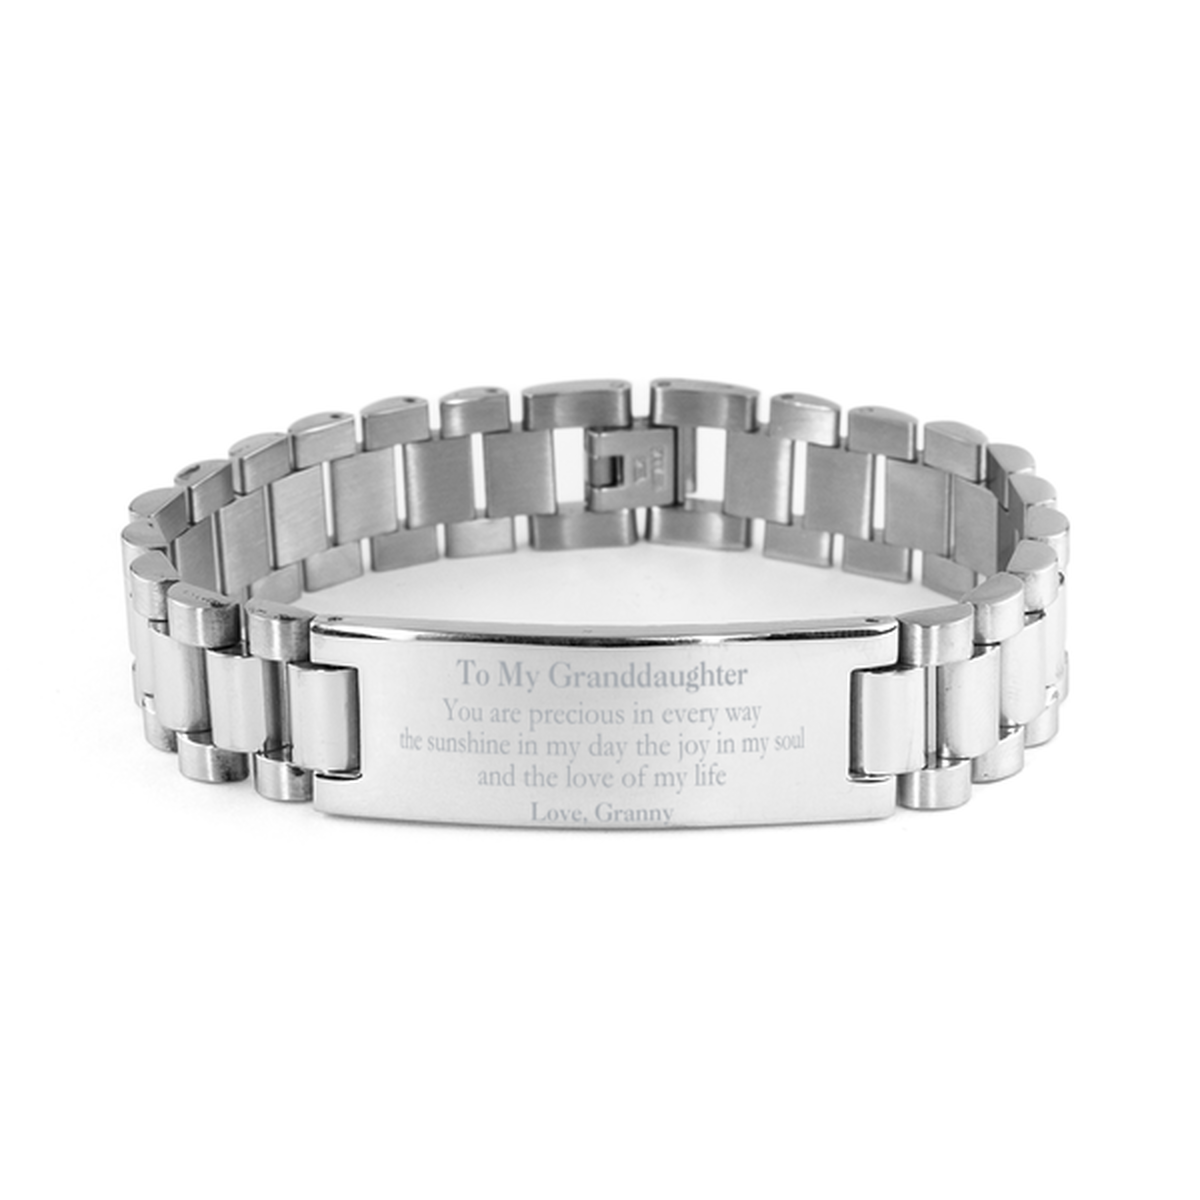 Graduation Gifts for Granddaughter Ladder Stainless Steel Bracelet Present from Granny, Christmas Granddaughter Birthday Gifts Granddaughter You are precious in every way the sunshine in my day. Love, Granny